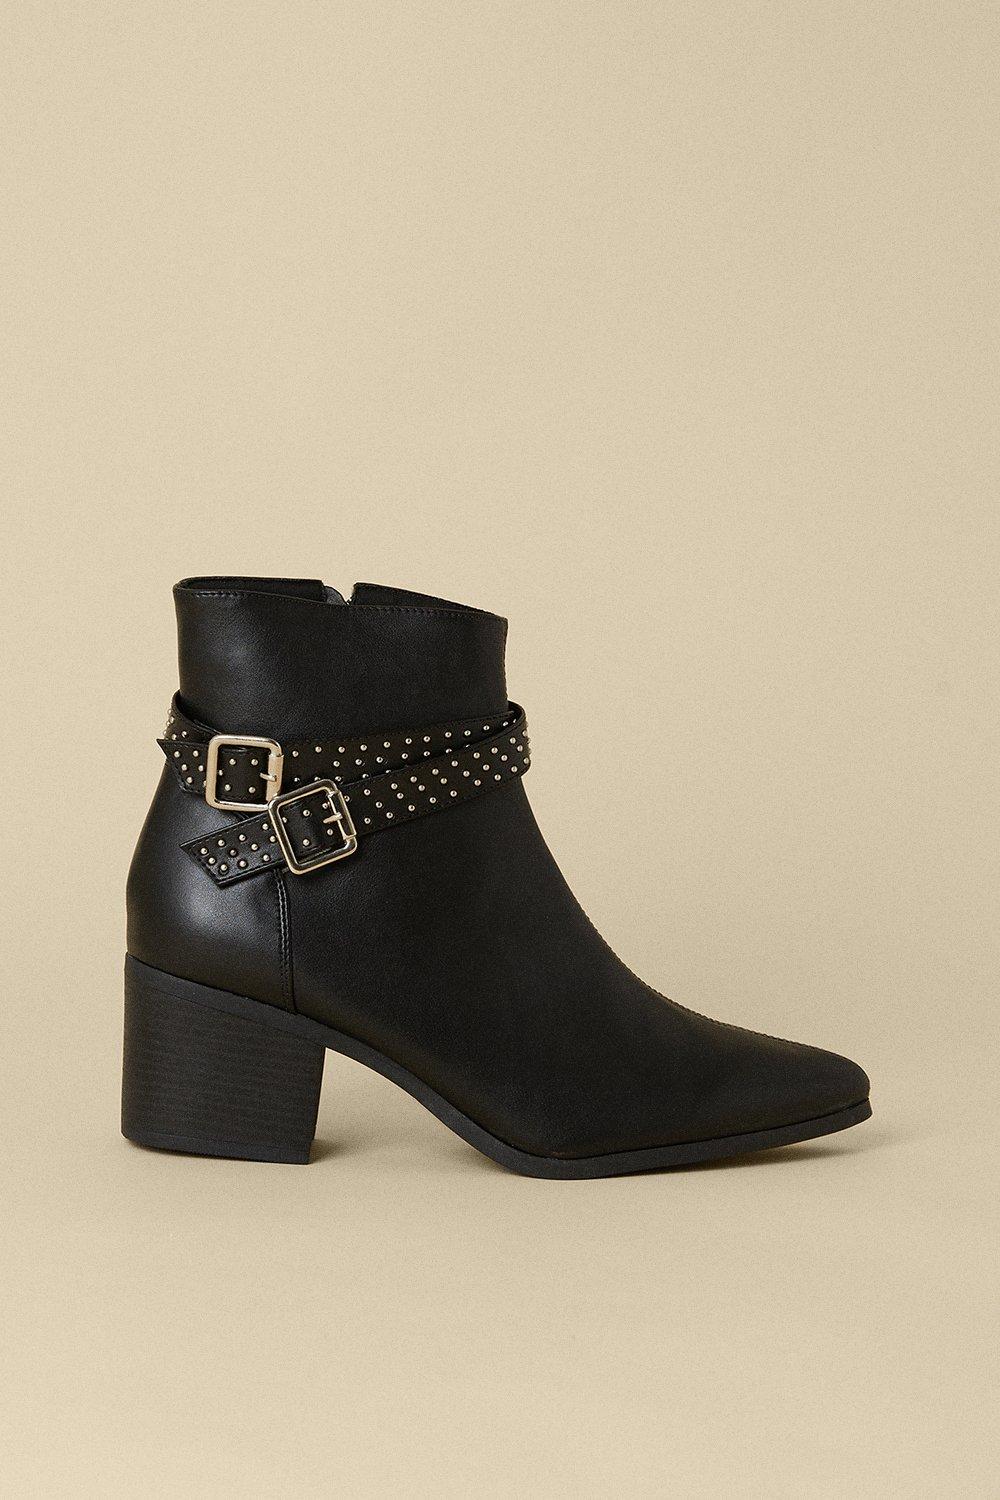 oasis belle ankle boot